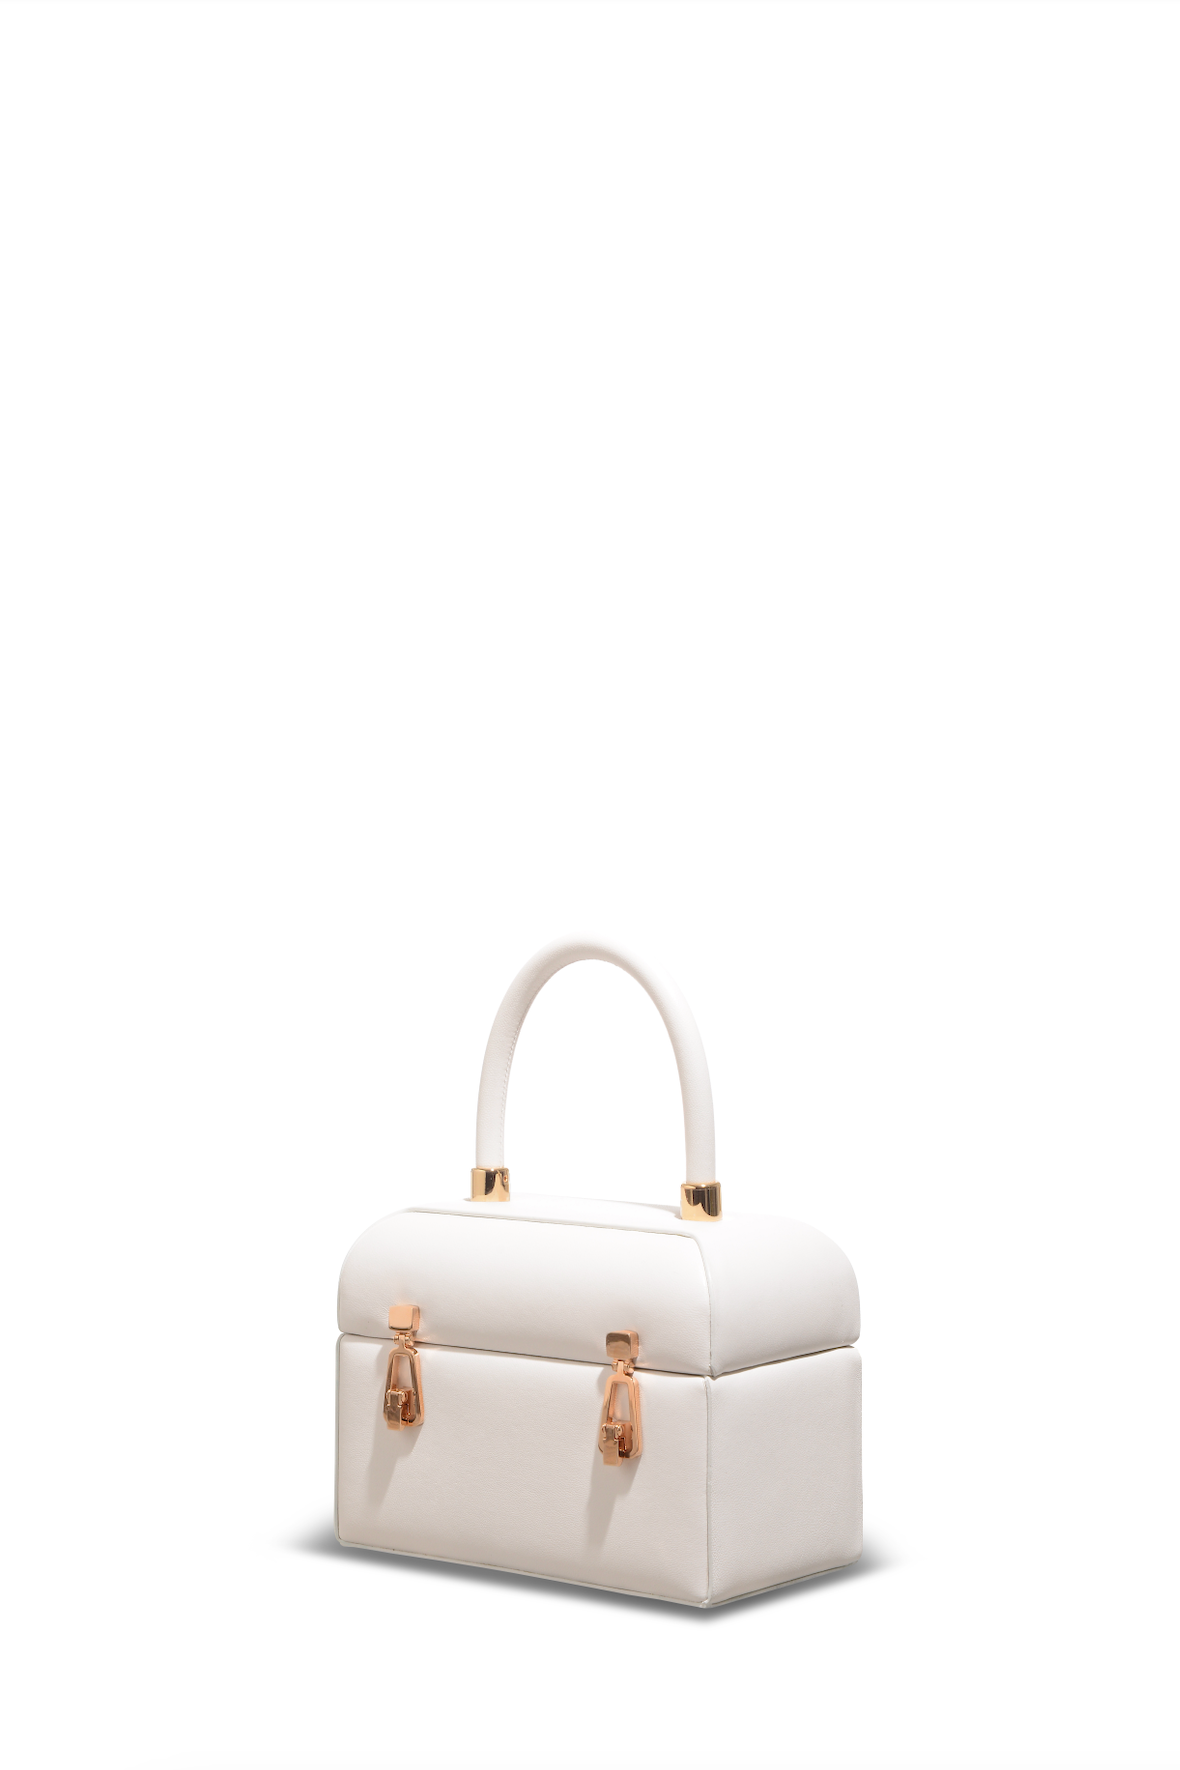 Patsy Bag in Ivory Nappa Leather